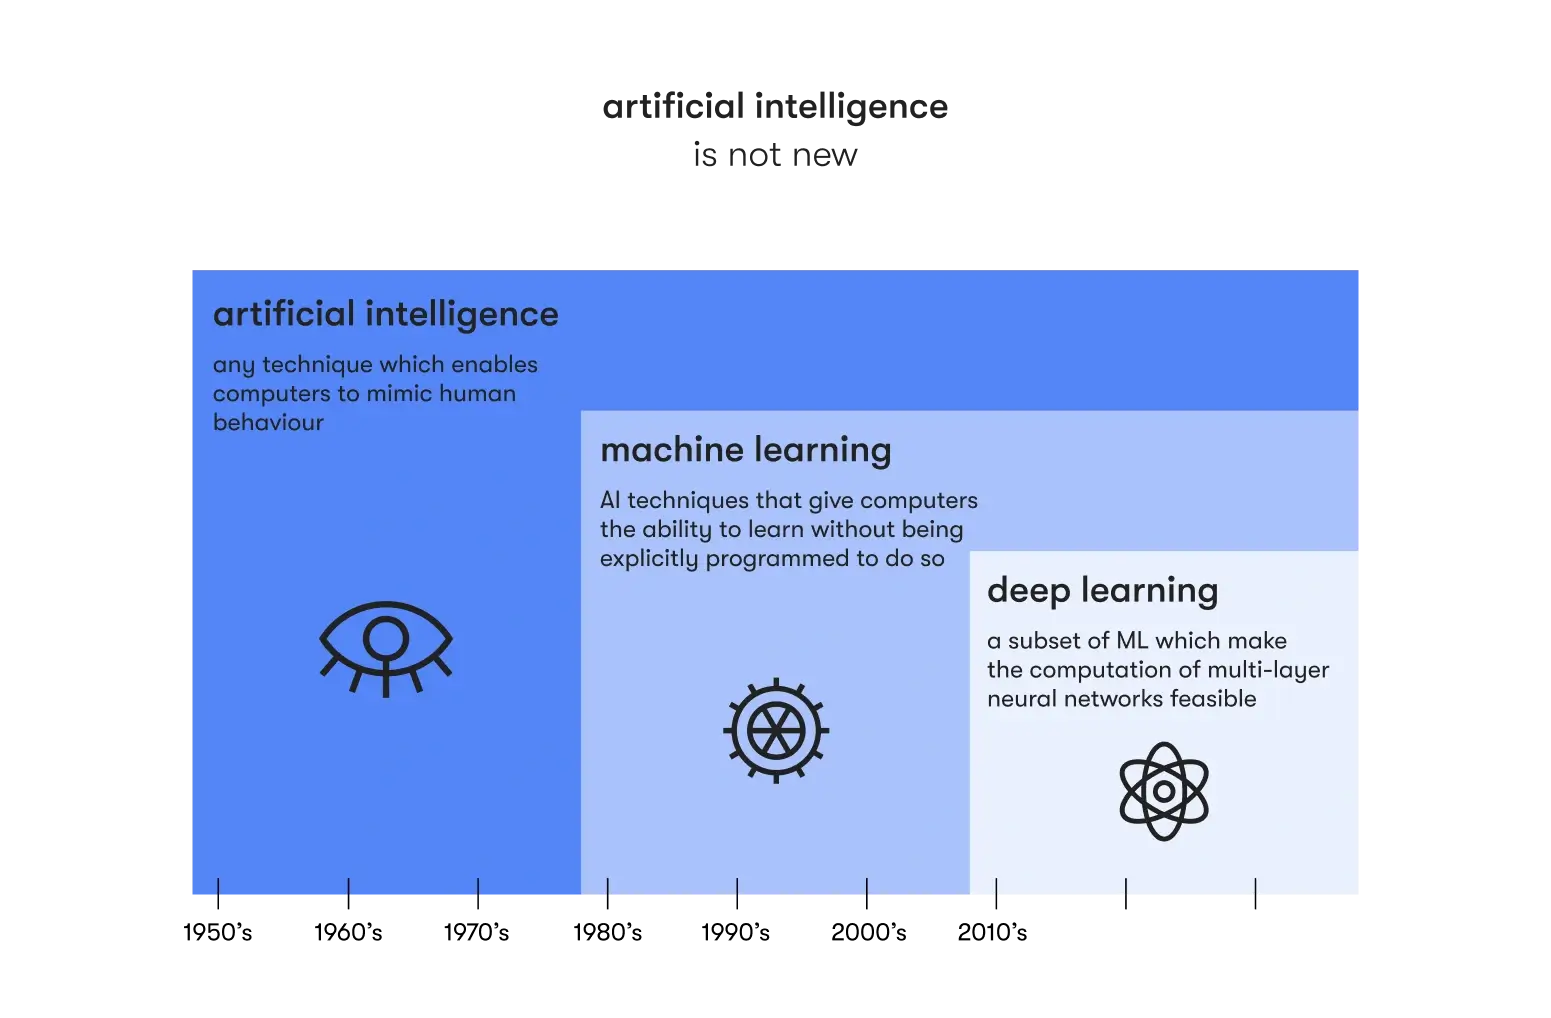 Timeline of Artificial intelligence technology